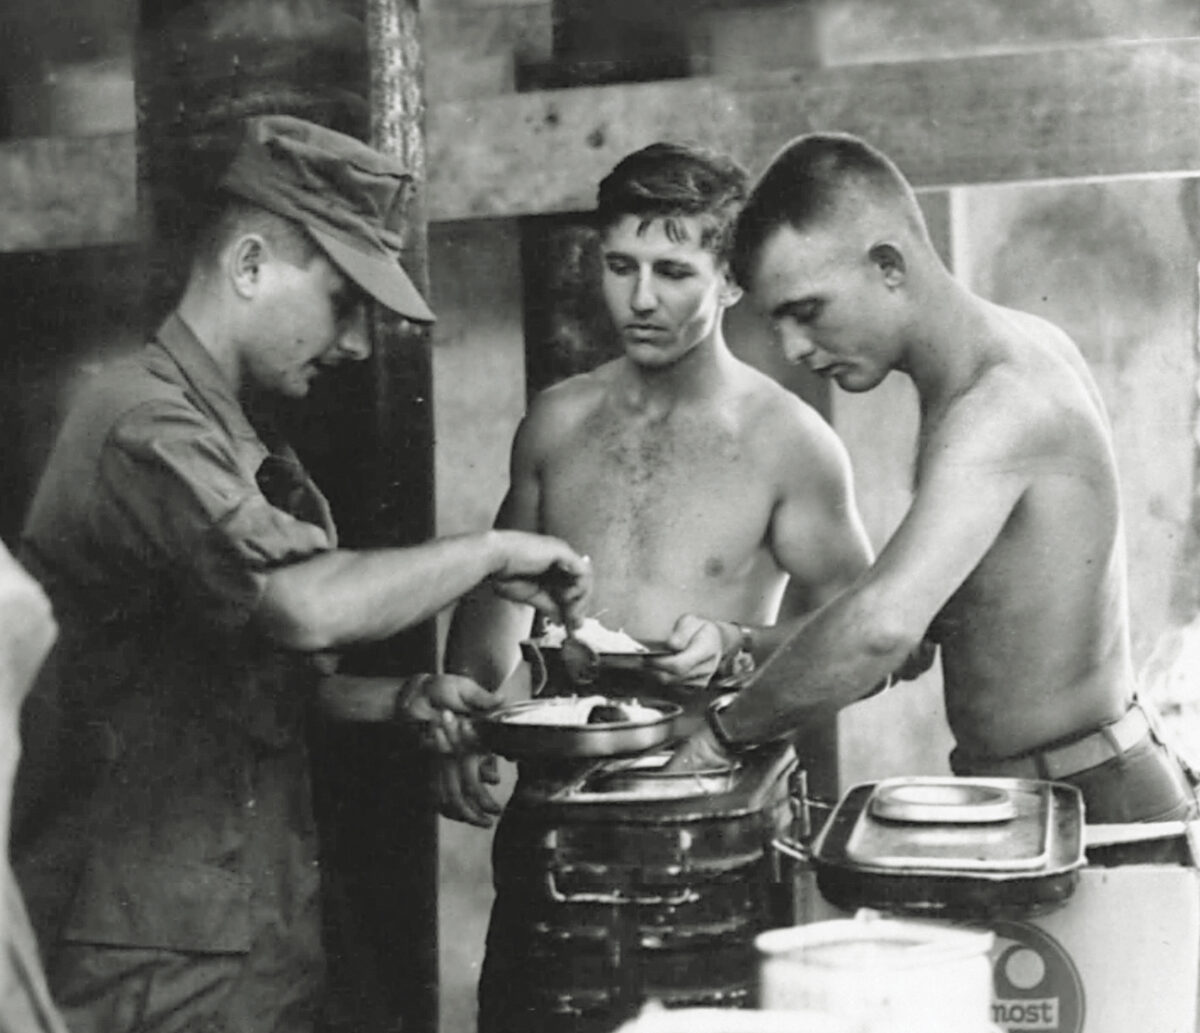 Photo of U.S. Marines in the chow line.